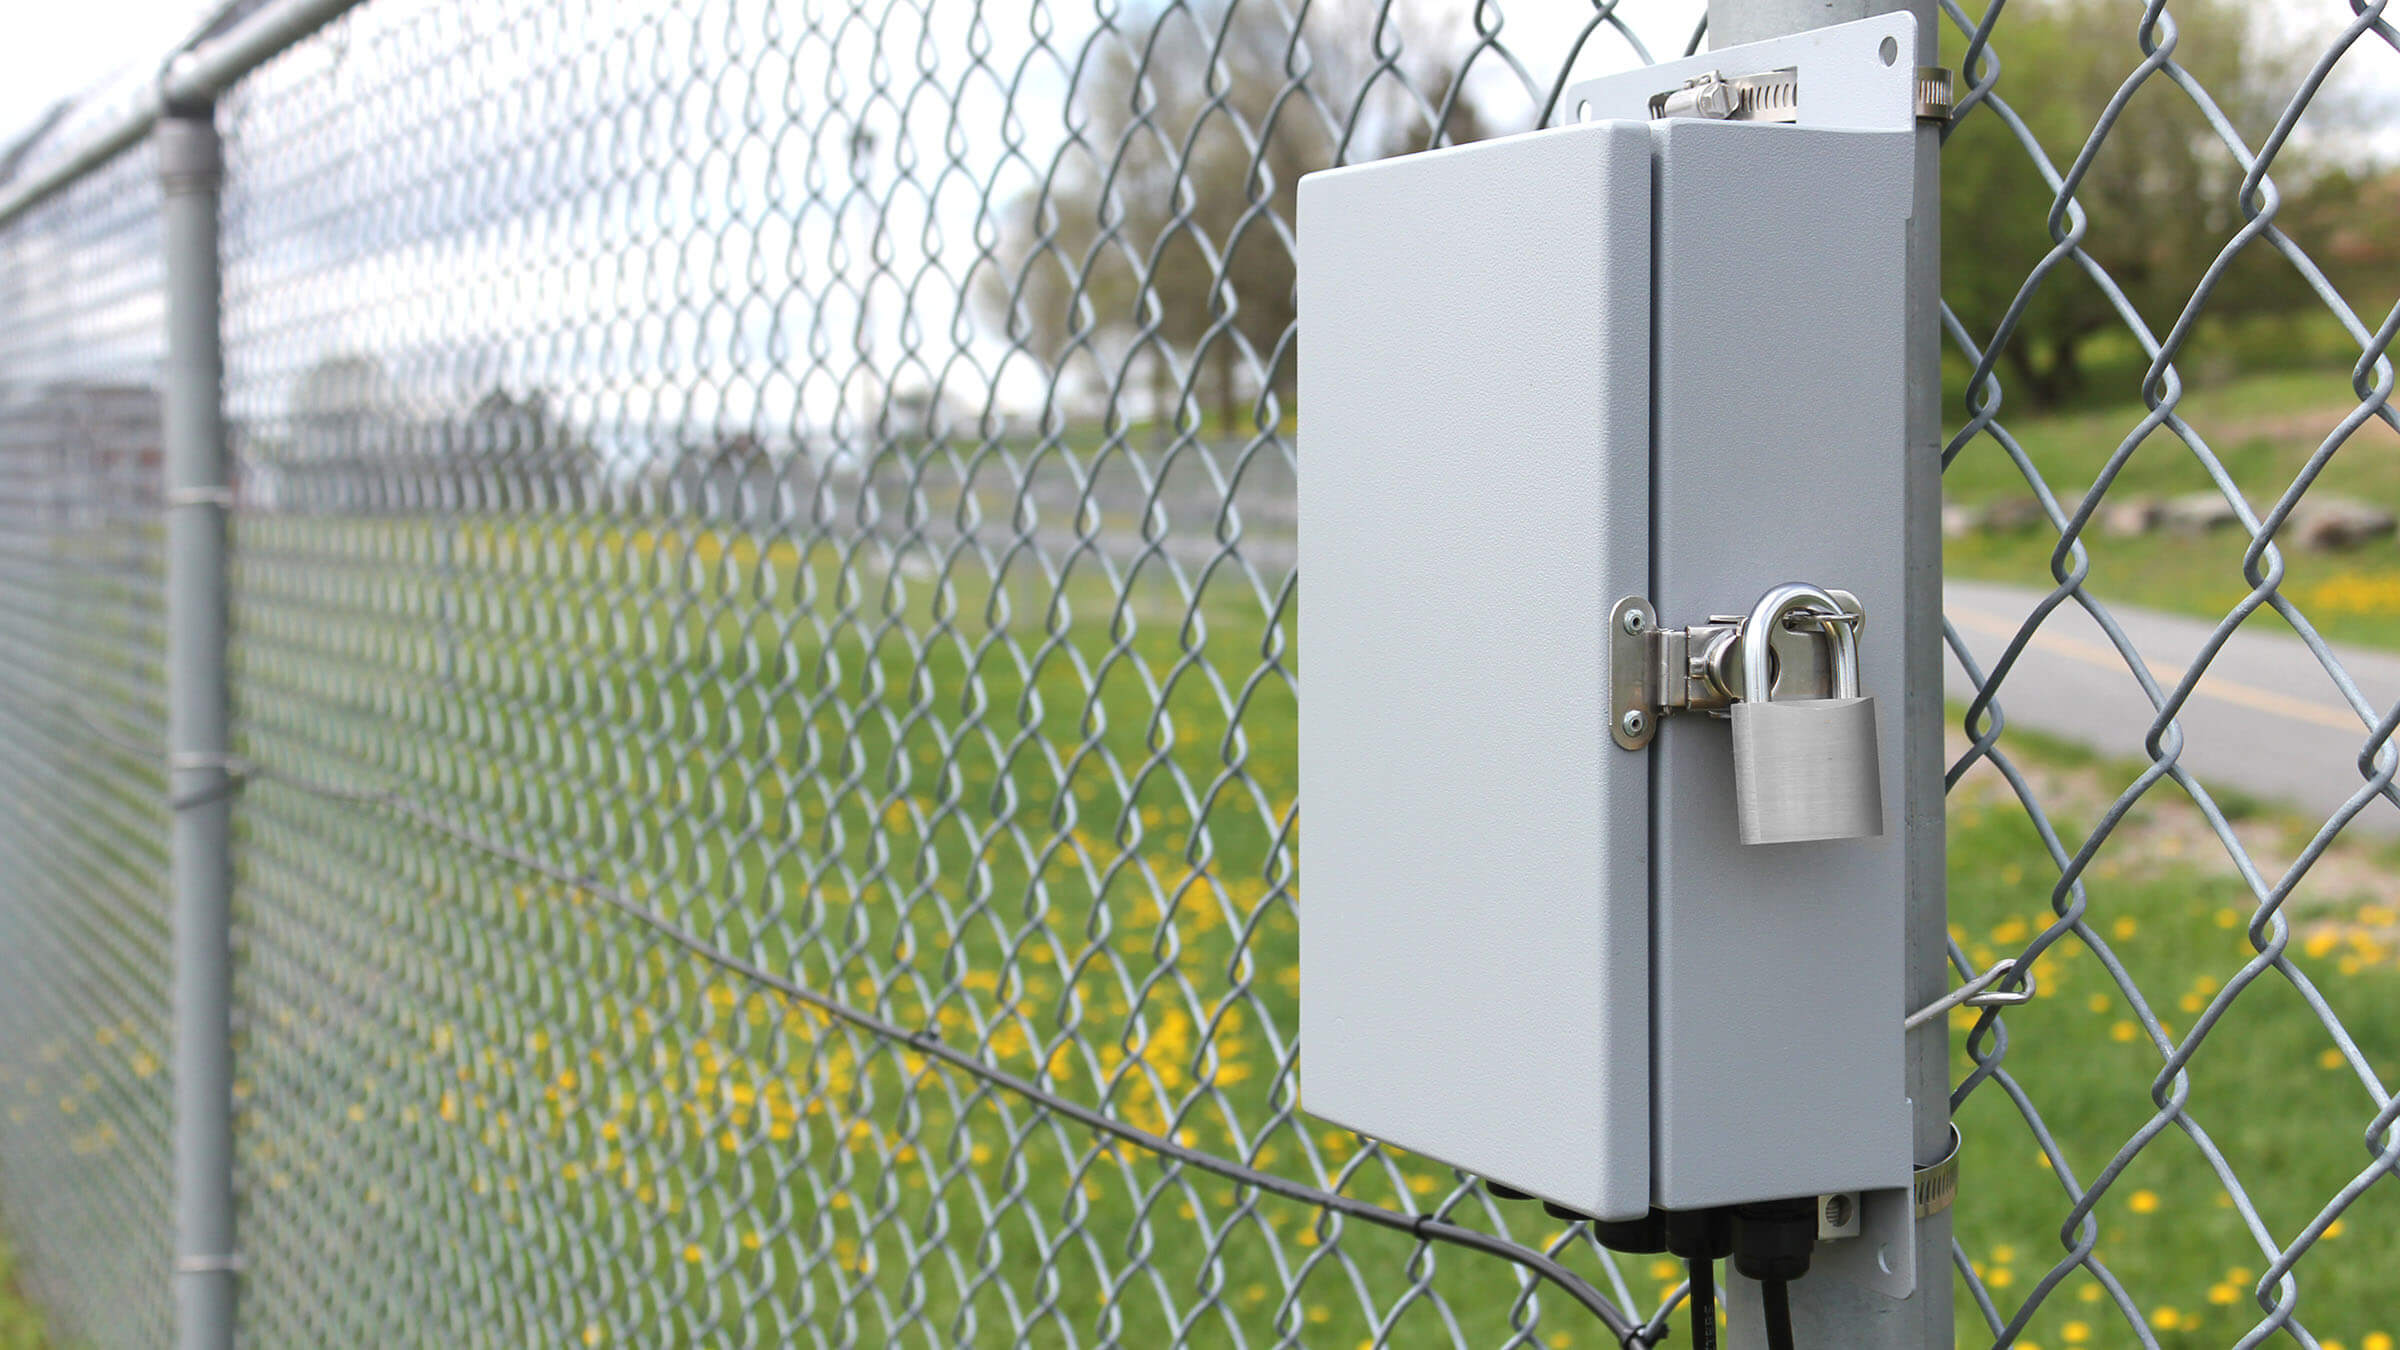 Securing Your Perimeter With FenSense™: The Revolutionary Product That  Combines Physical Fences With Intrusion Detection Technology